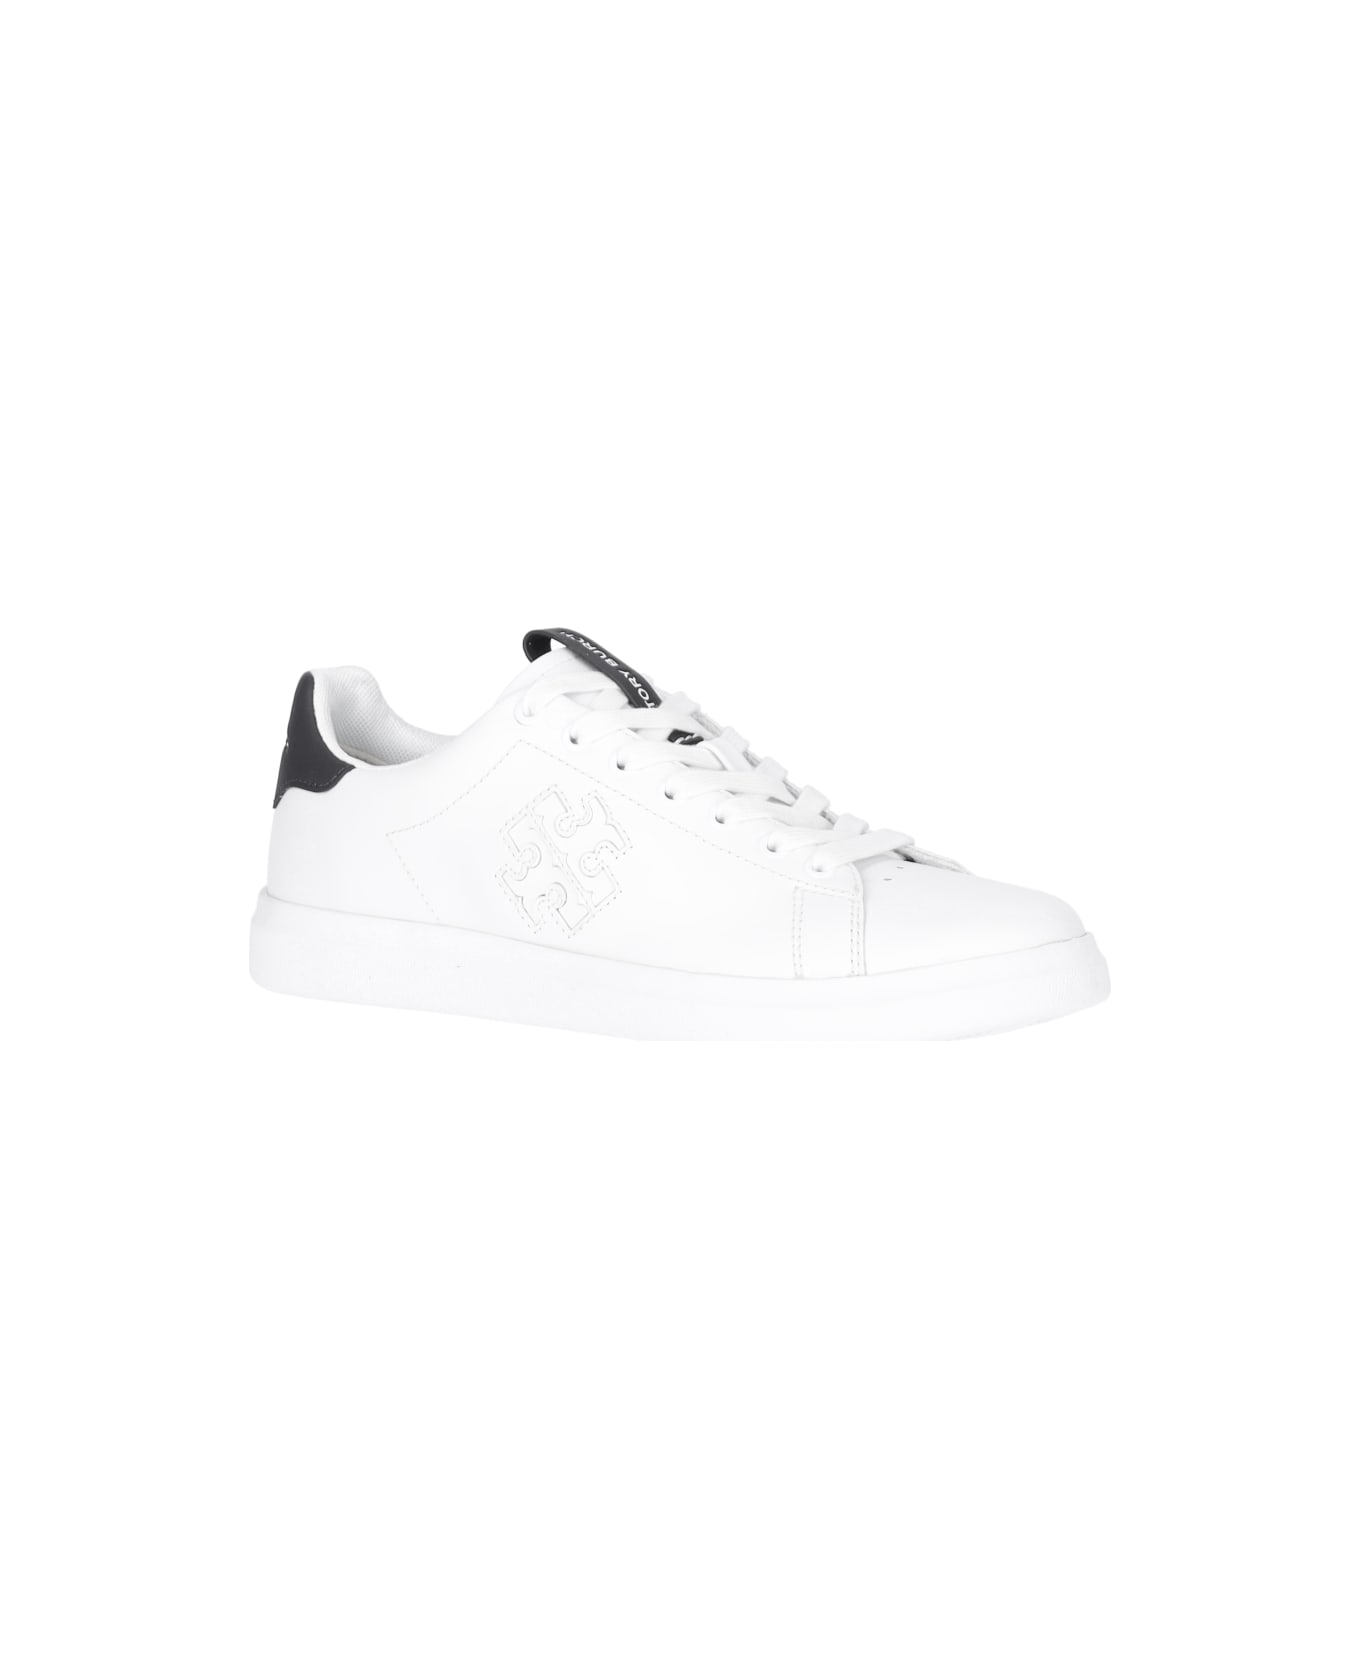 Tory Burch "howell" Sneakers - White